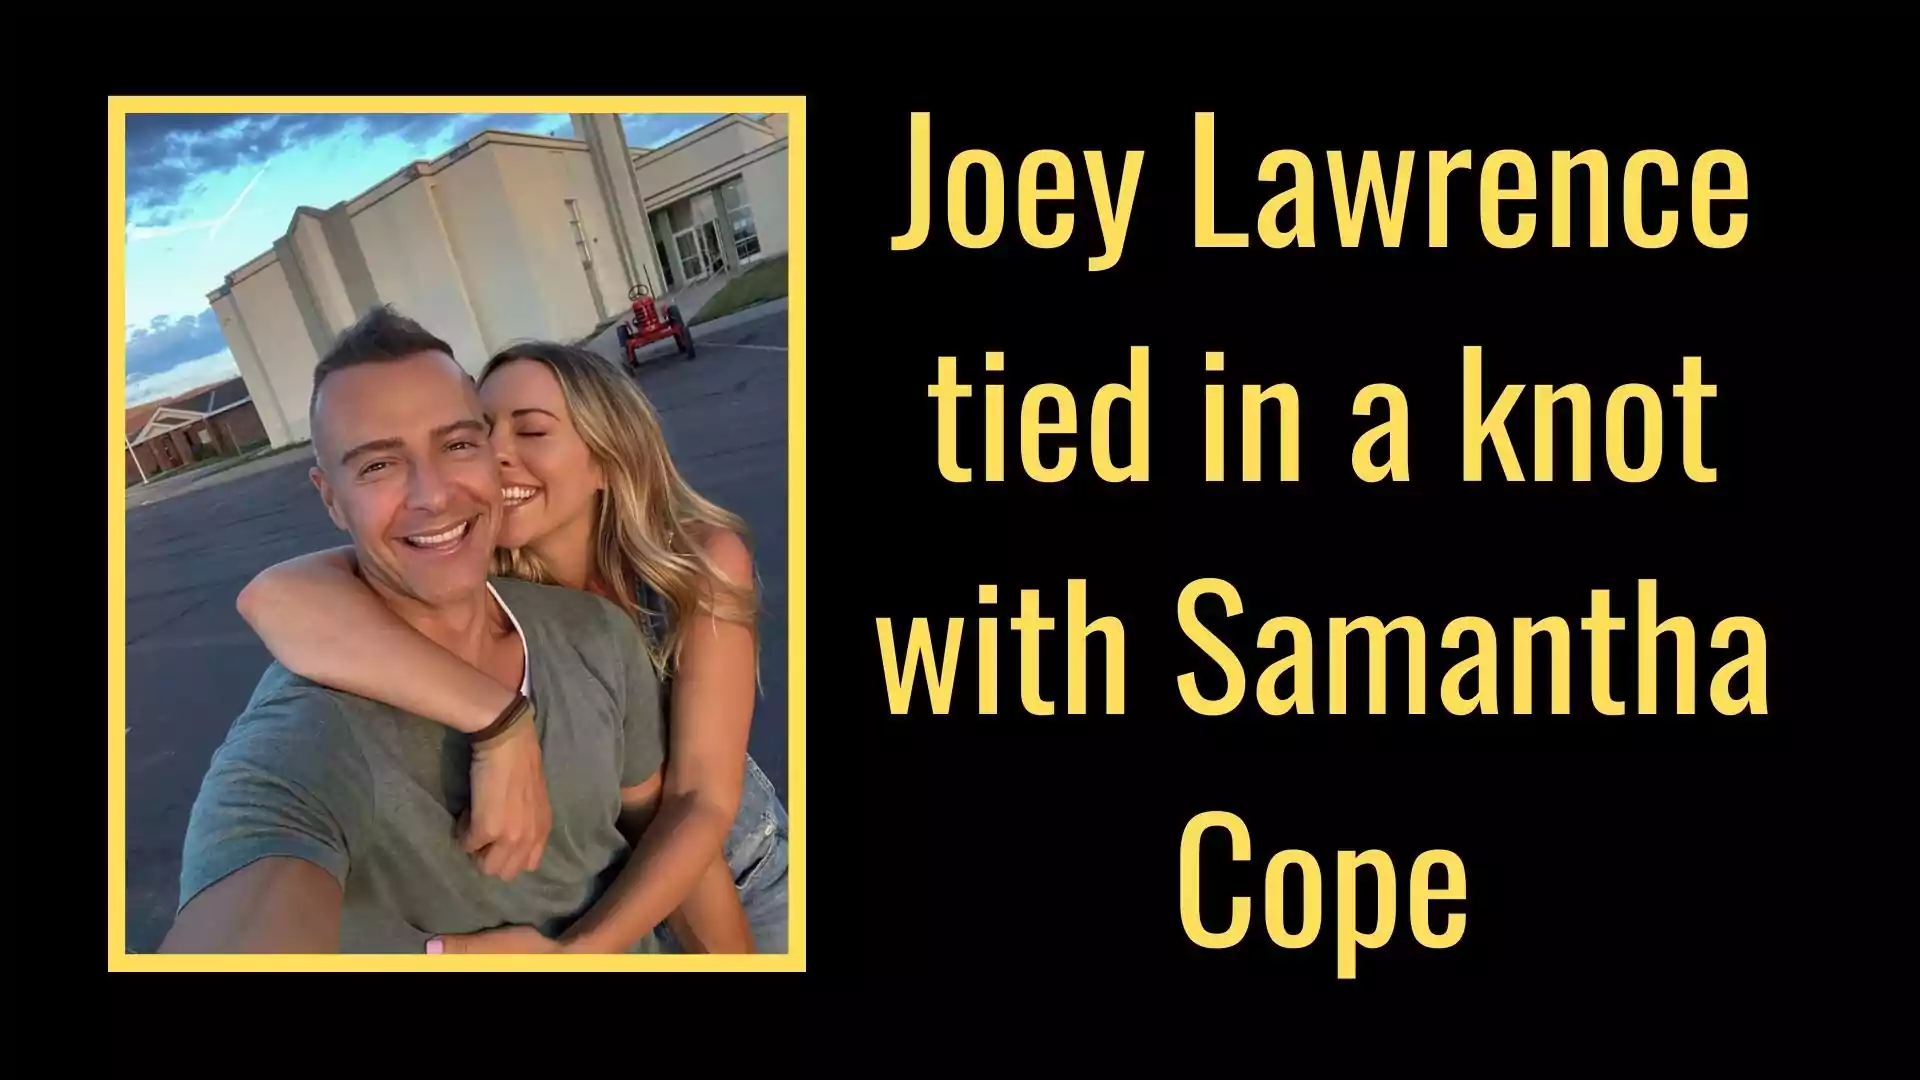 Joey Lawrence tied in a knot with Samantha Cope. Joey Lawrence and Samantha Cope got married on Sunday at Temecula, California.